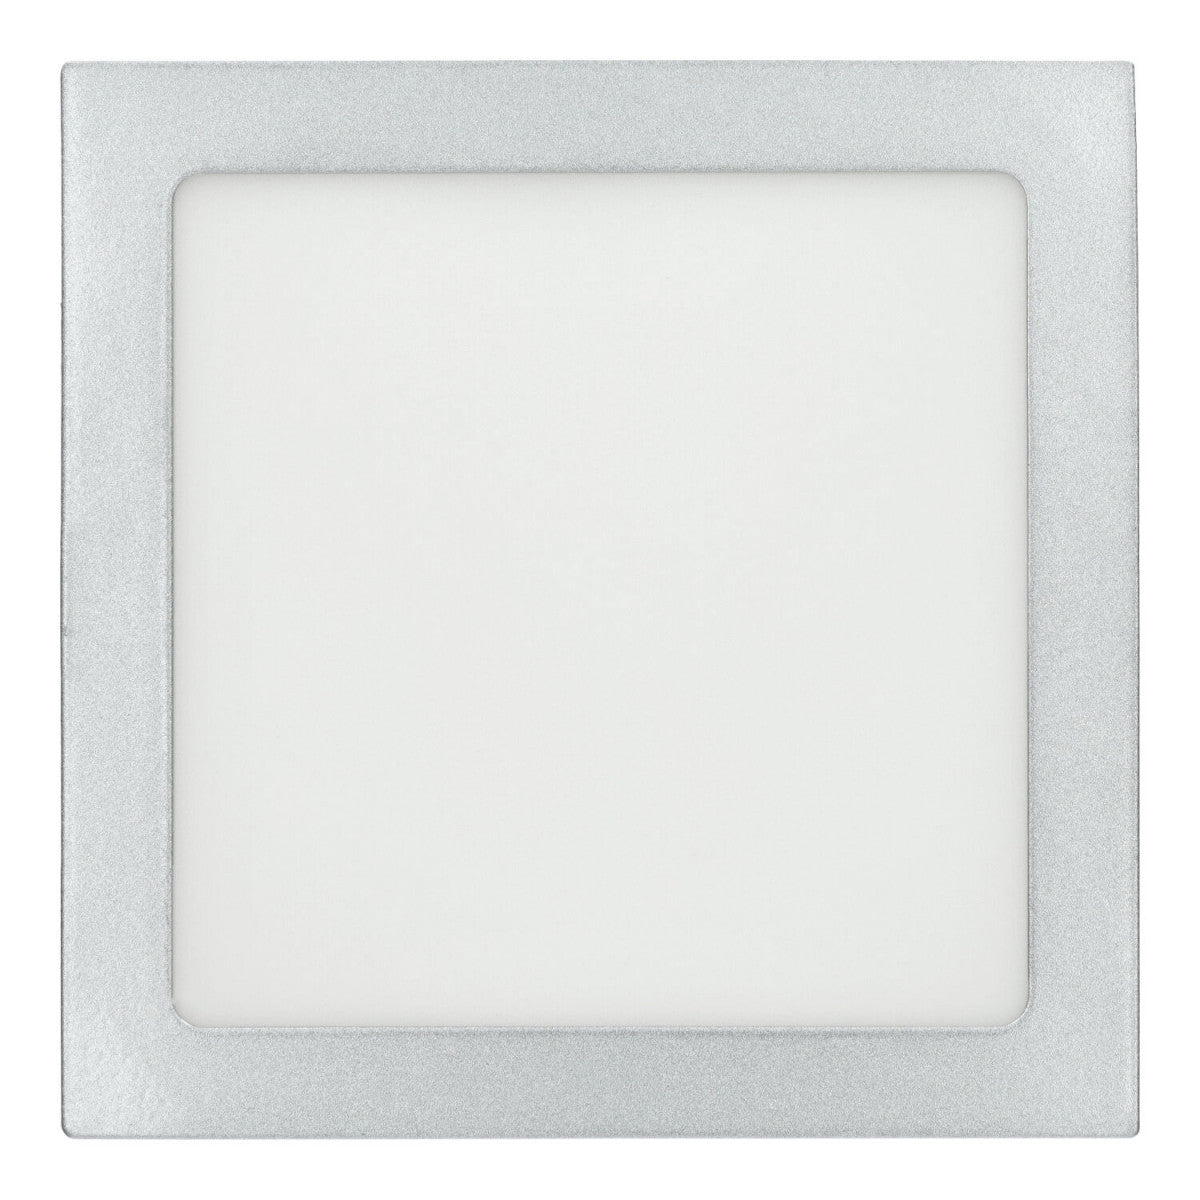 Led panel 24W GRAY square Recessed